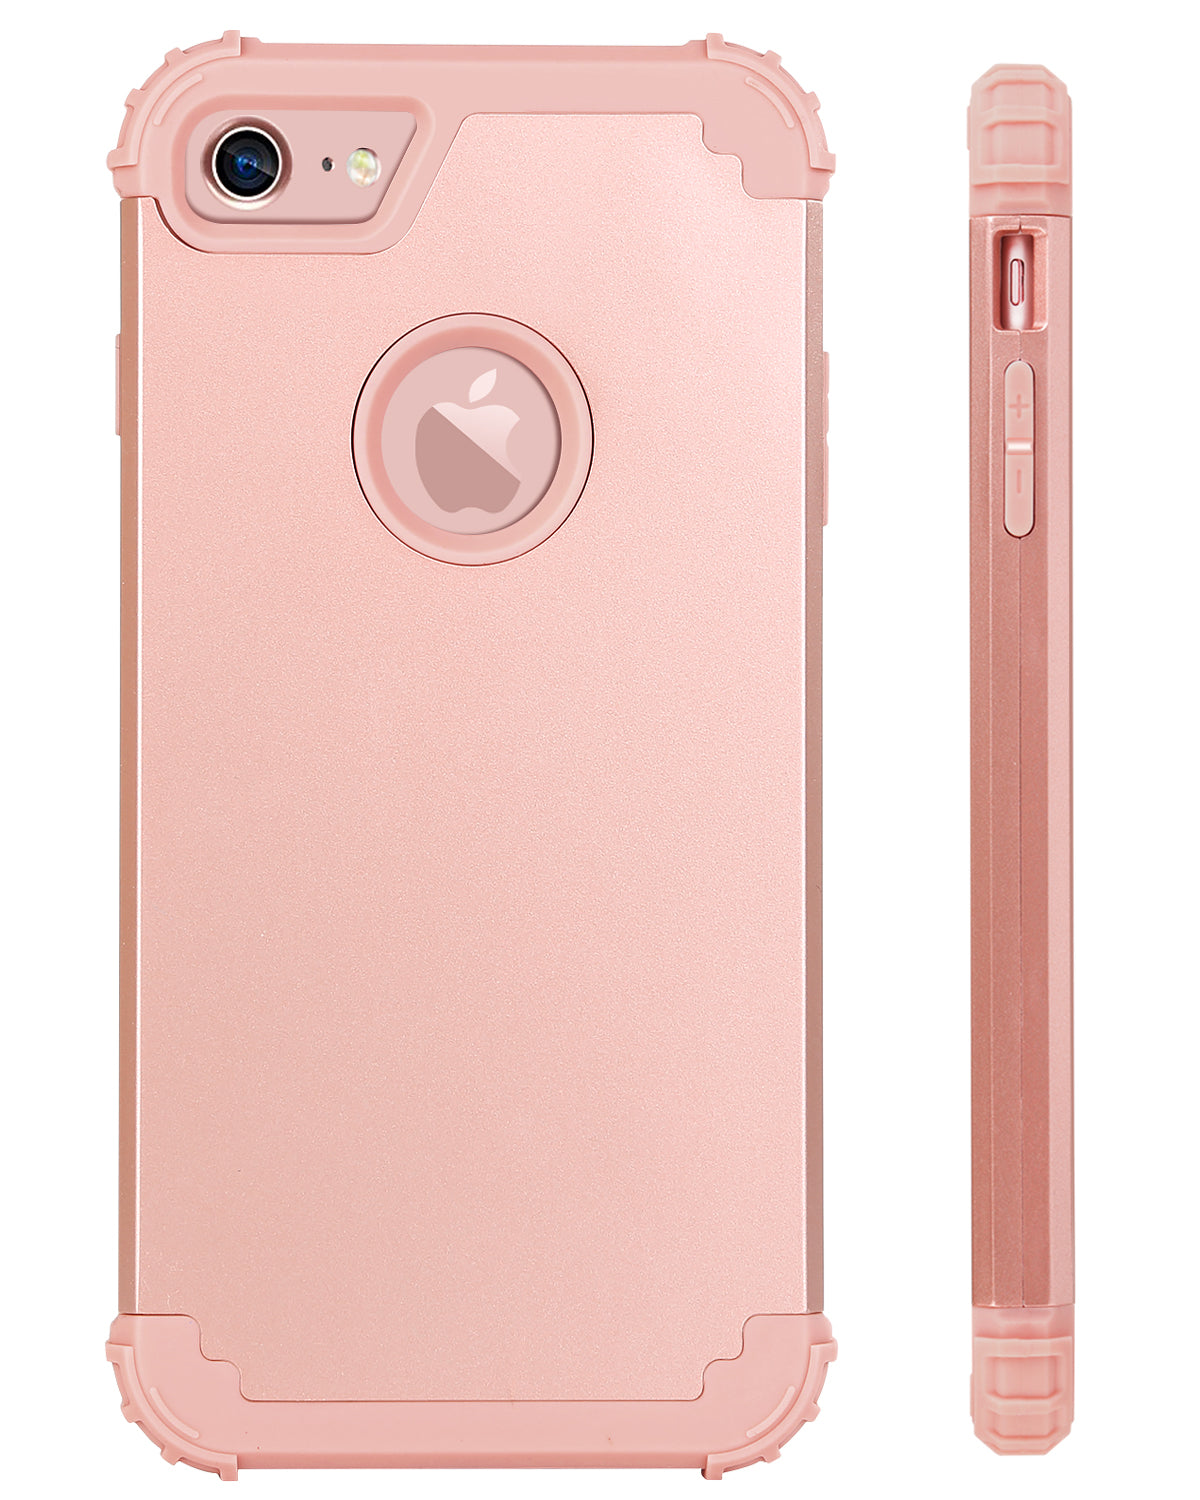 iPhone 7 Plus Case for Girls Three Layer Heavy Duty Protective Cover Rose  Gold